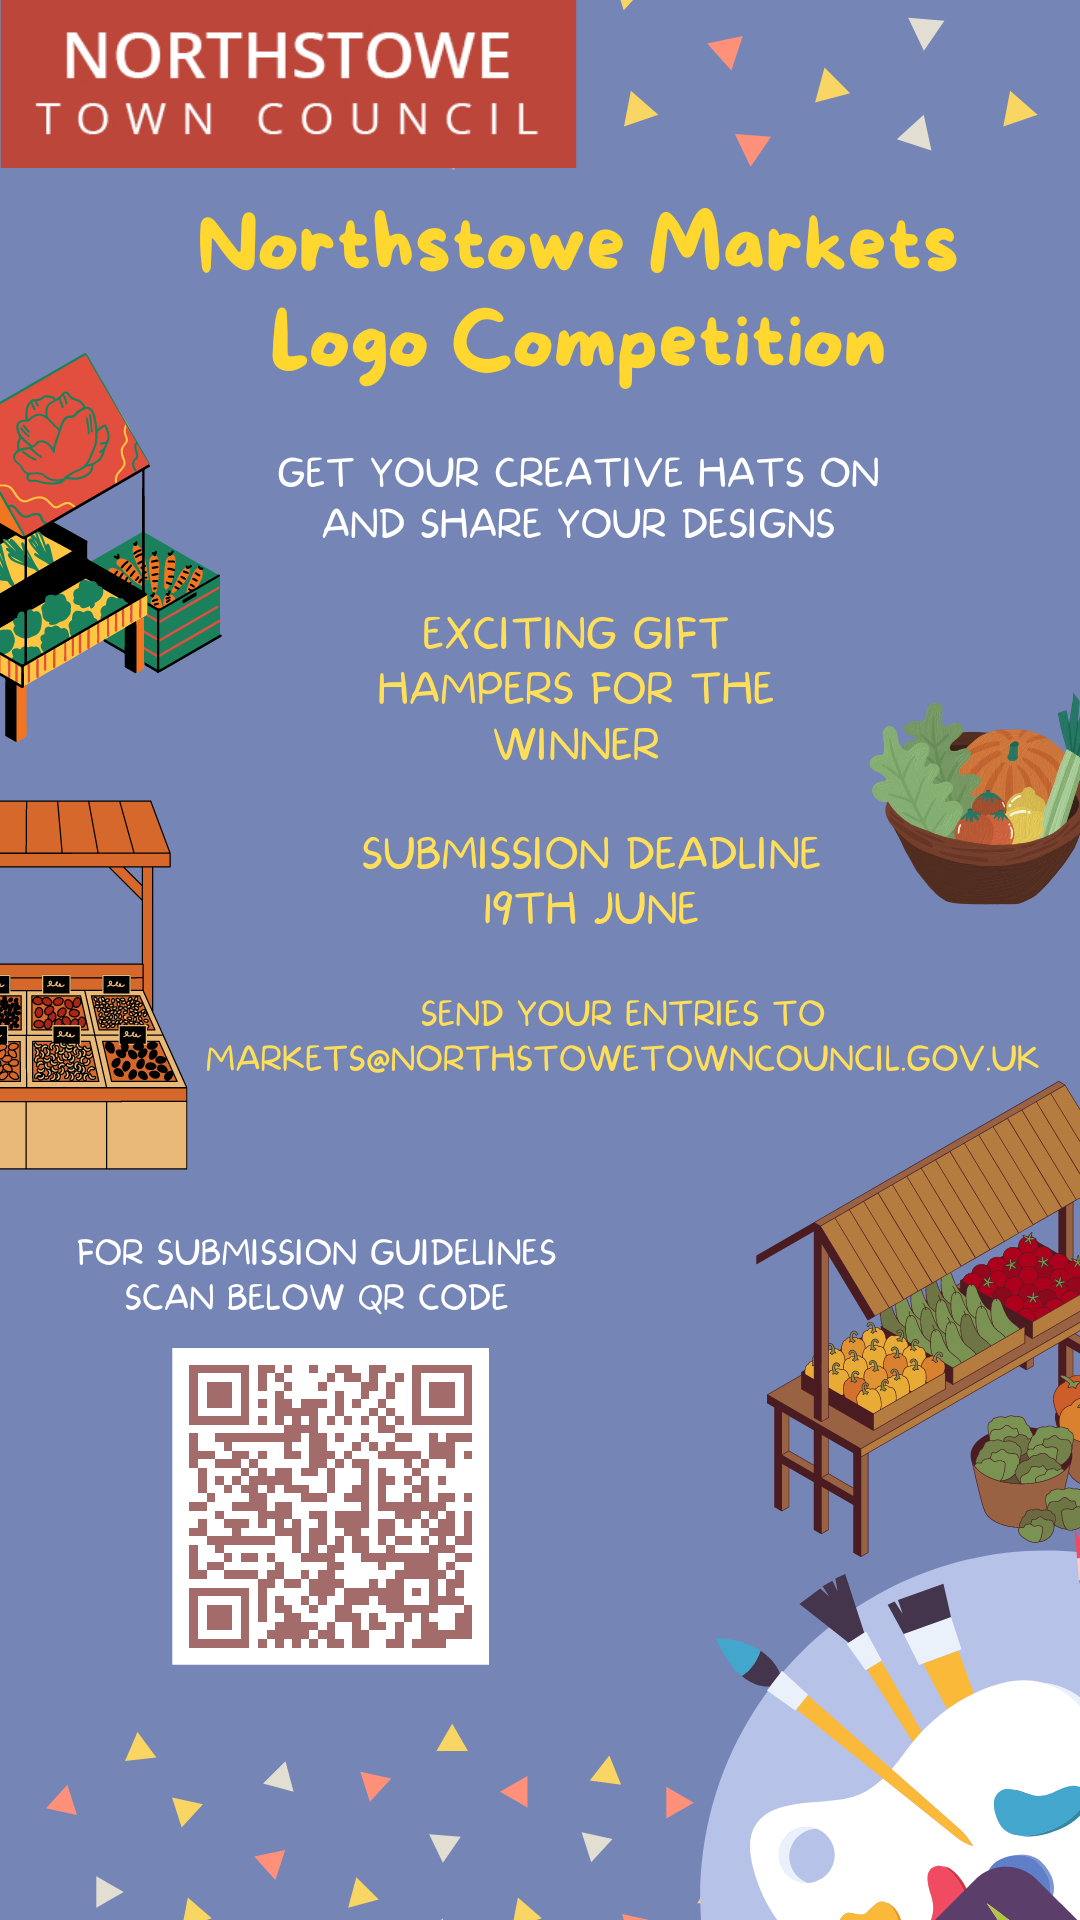 Northstowe Town Council Calls for Creative Minds in Community Logo Competition for the Northstowe Markets.